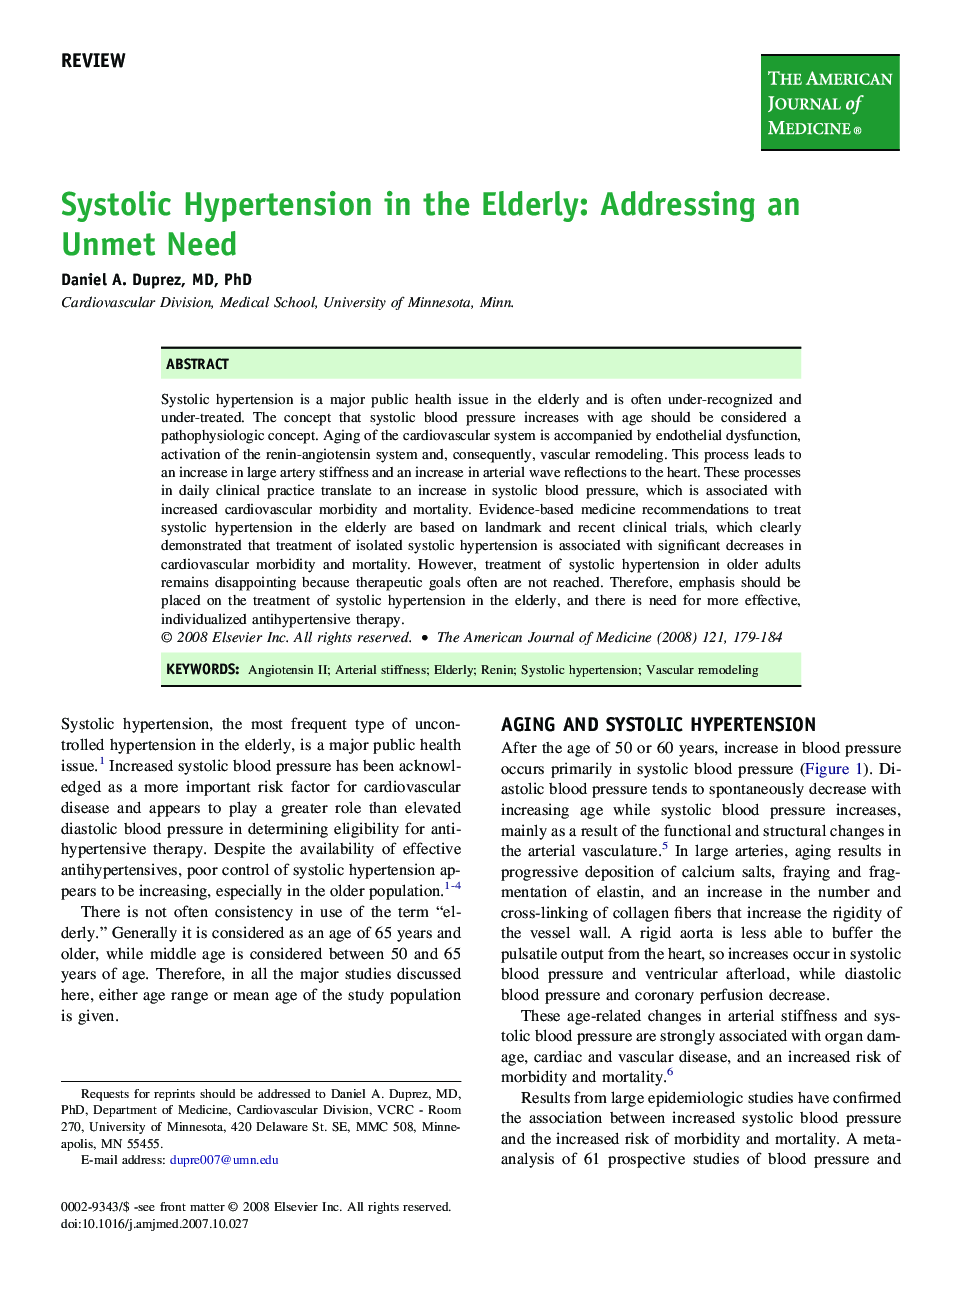 Systolic Hypertension in the Elderly: Addressing an Unmet Need